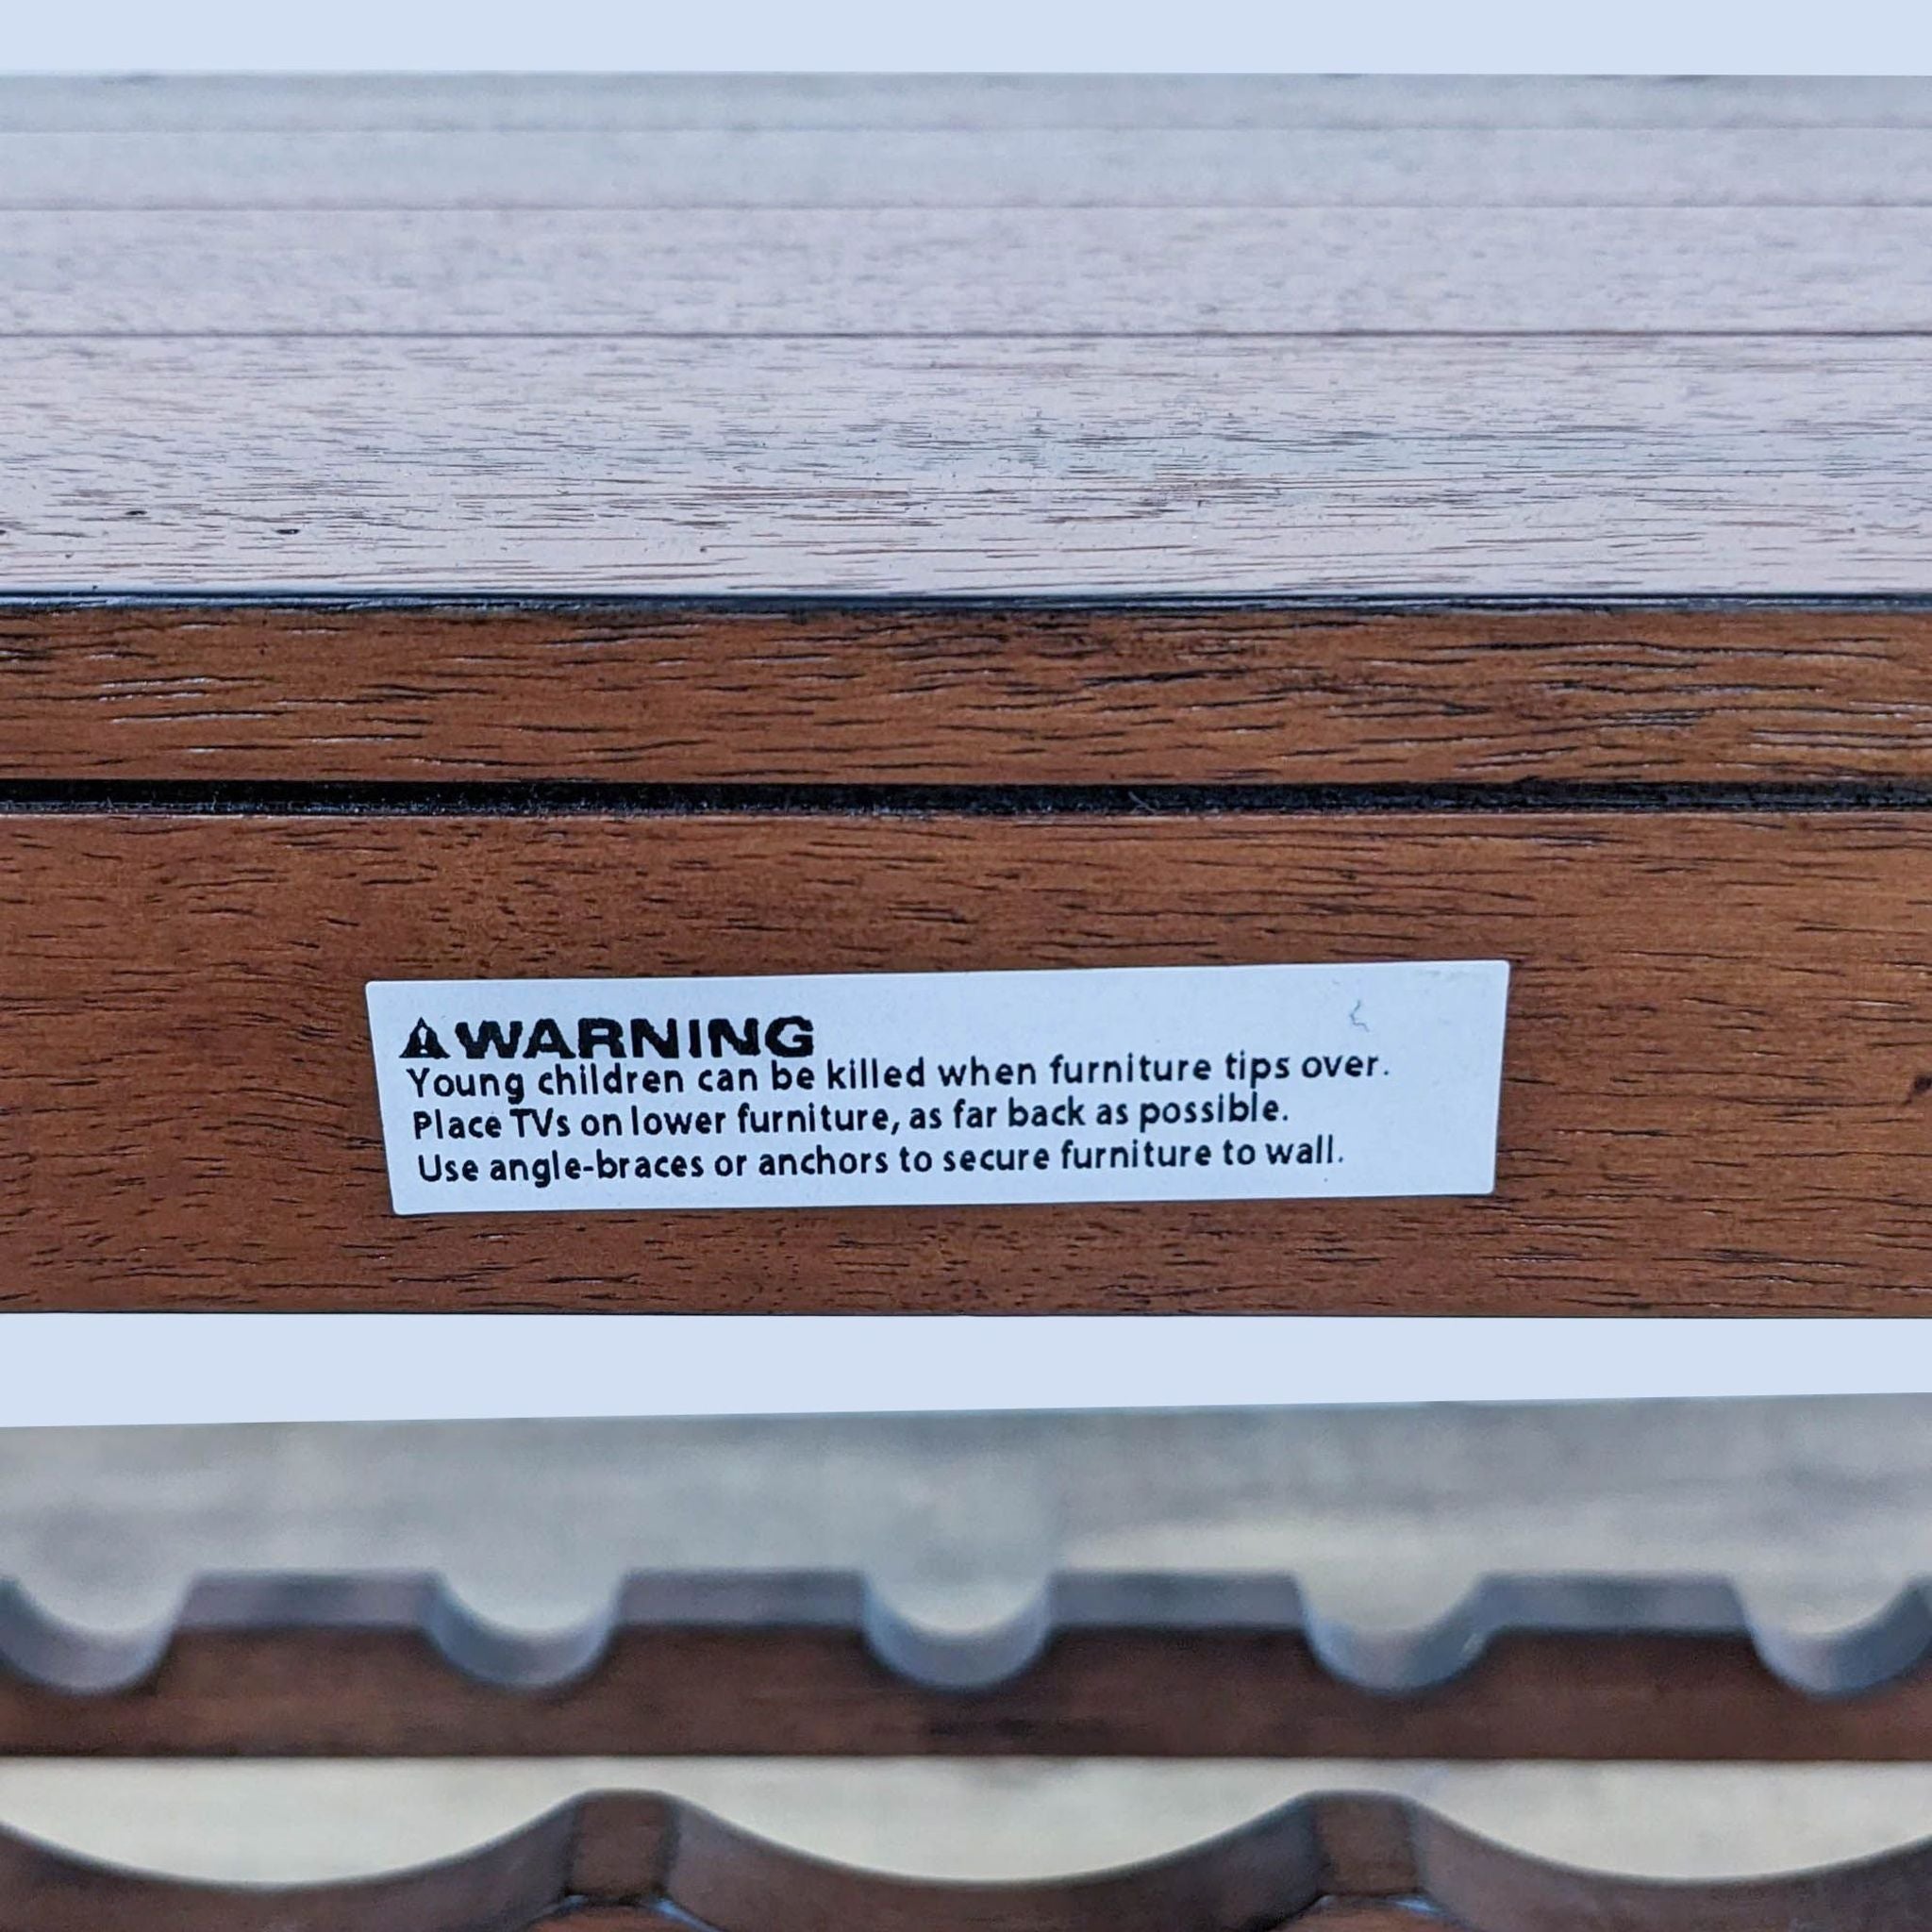 Warning label on Reperch furniture advising to secure to wall to prevent tipping.